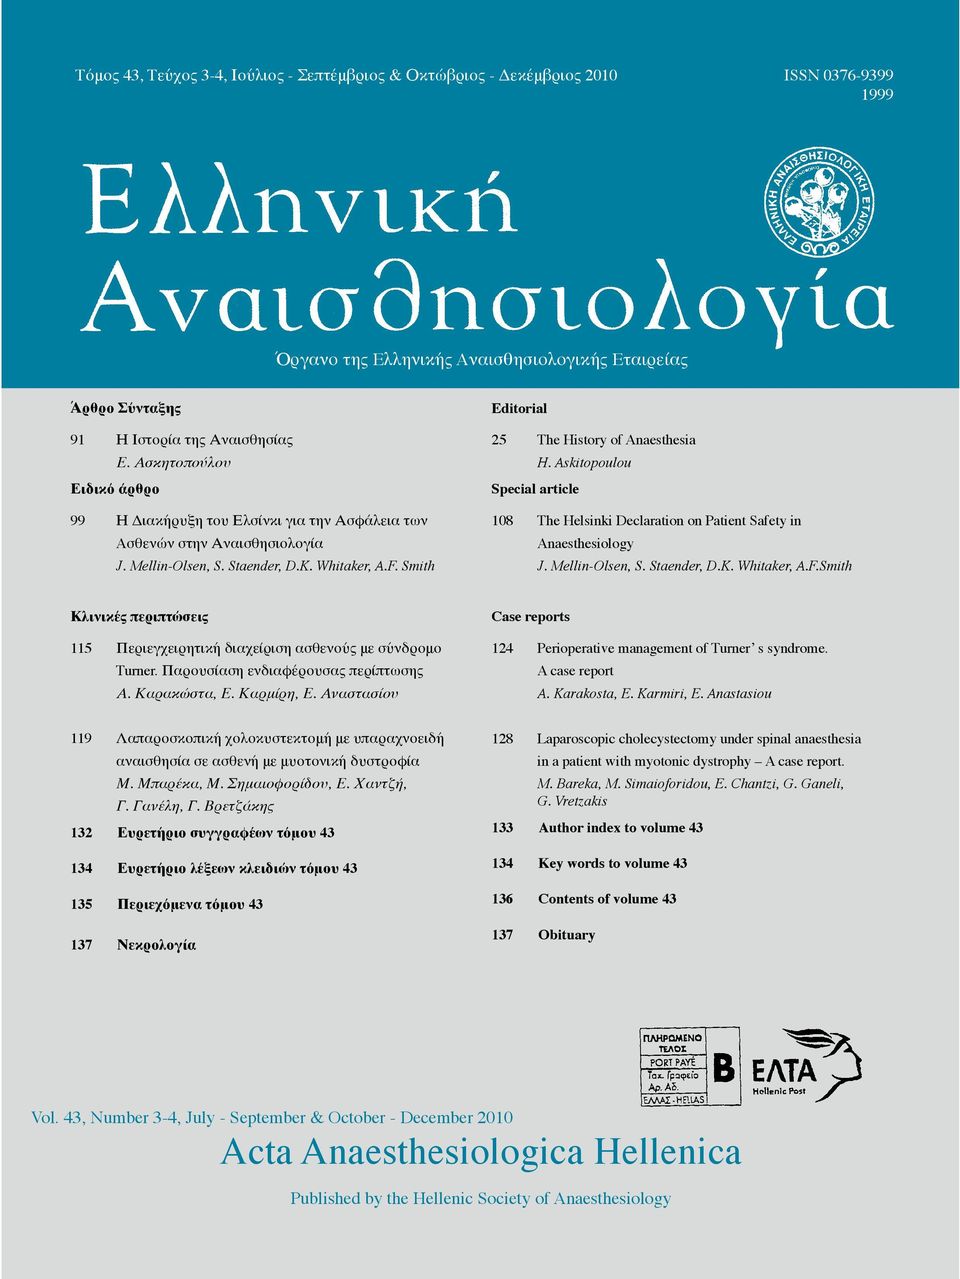 Smith Editorial 25 The History of Anaesthesia H. Askitopoulou Special article 108 The Helsinki Declaration on Patient Safety in Anaesthesiology J. Mellin-Olsen, S. Staender, D.K. Whitaker, A.F.